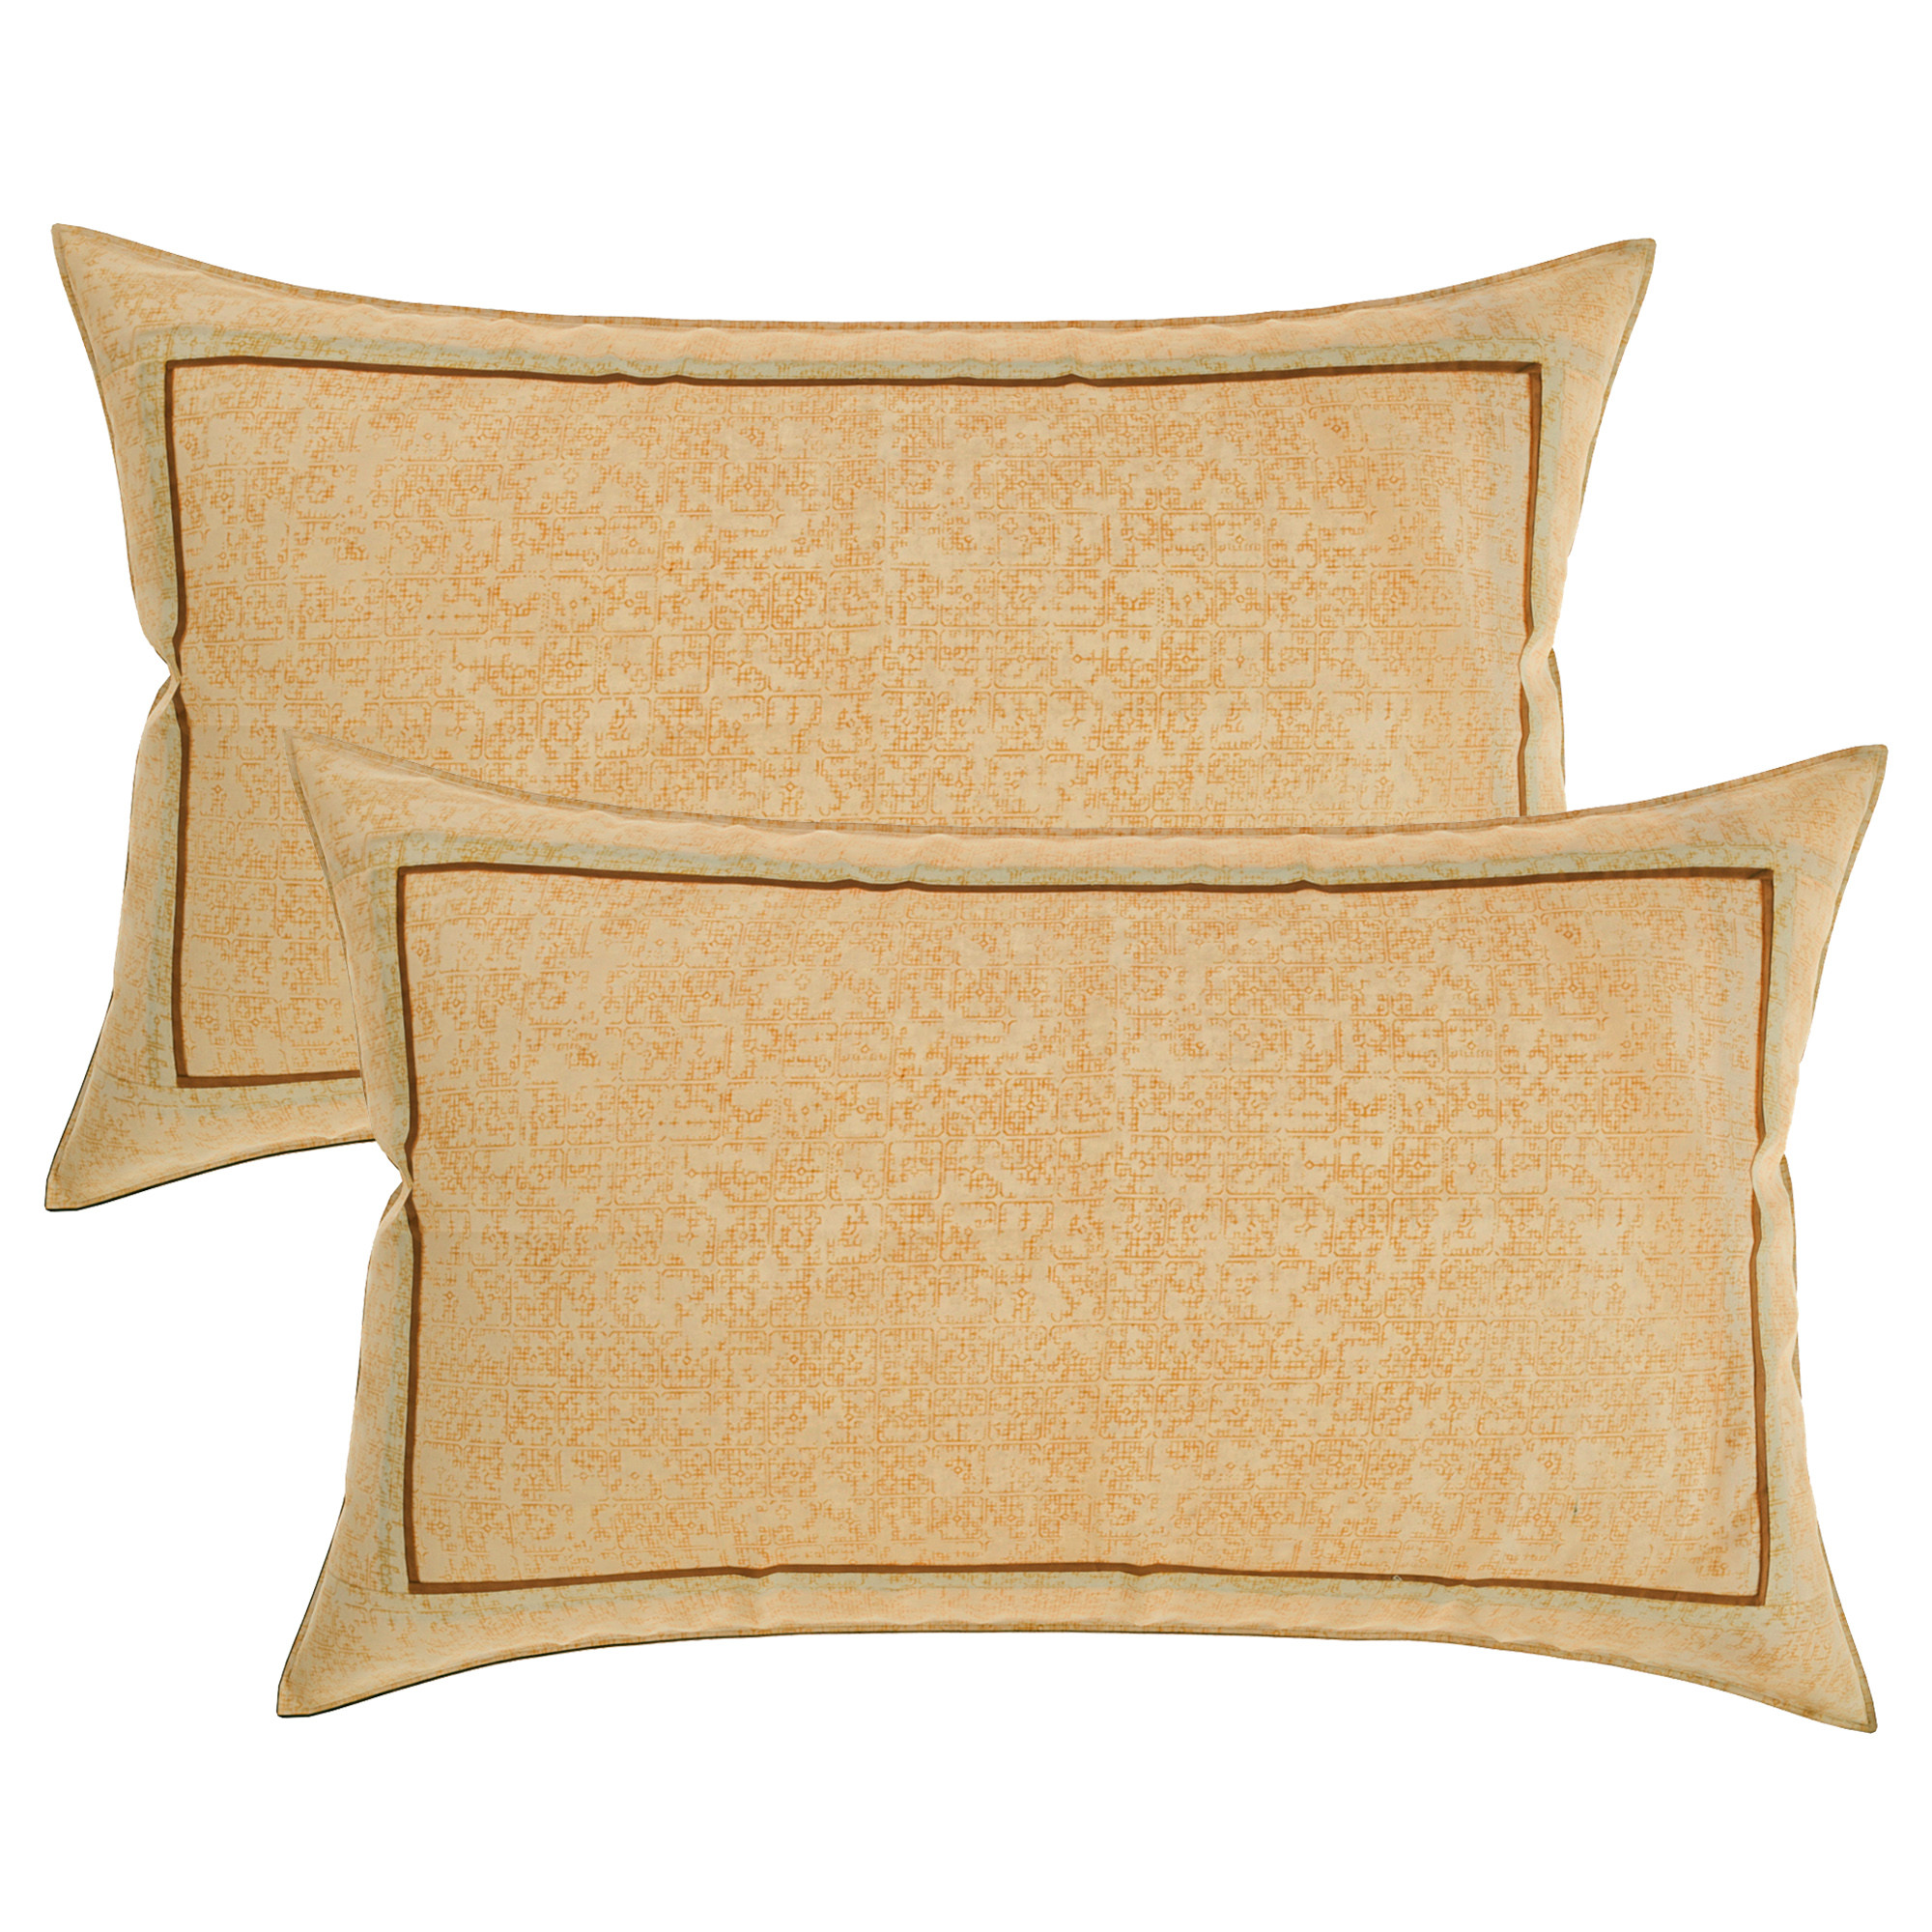 Kuber Industries Pillow Cover | Cotton Pillow Cover | Pillow Cover for Bedroom | Cushion Pillow Cover for Living Room | Khakhi Printed Pillow Cover Set | Set of 2 | Cream